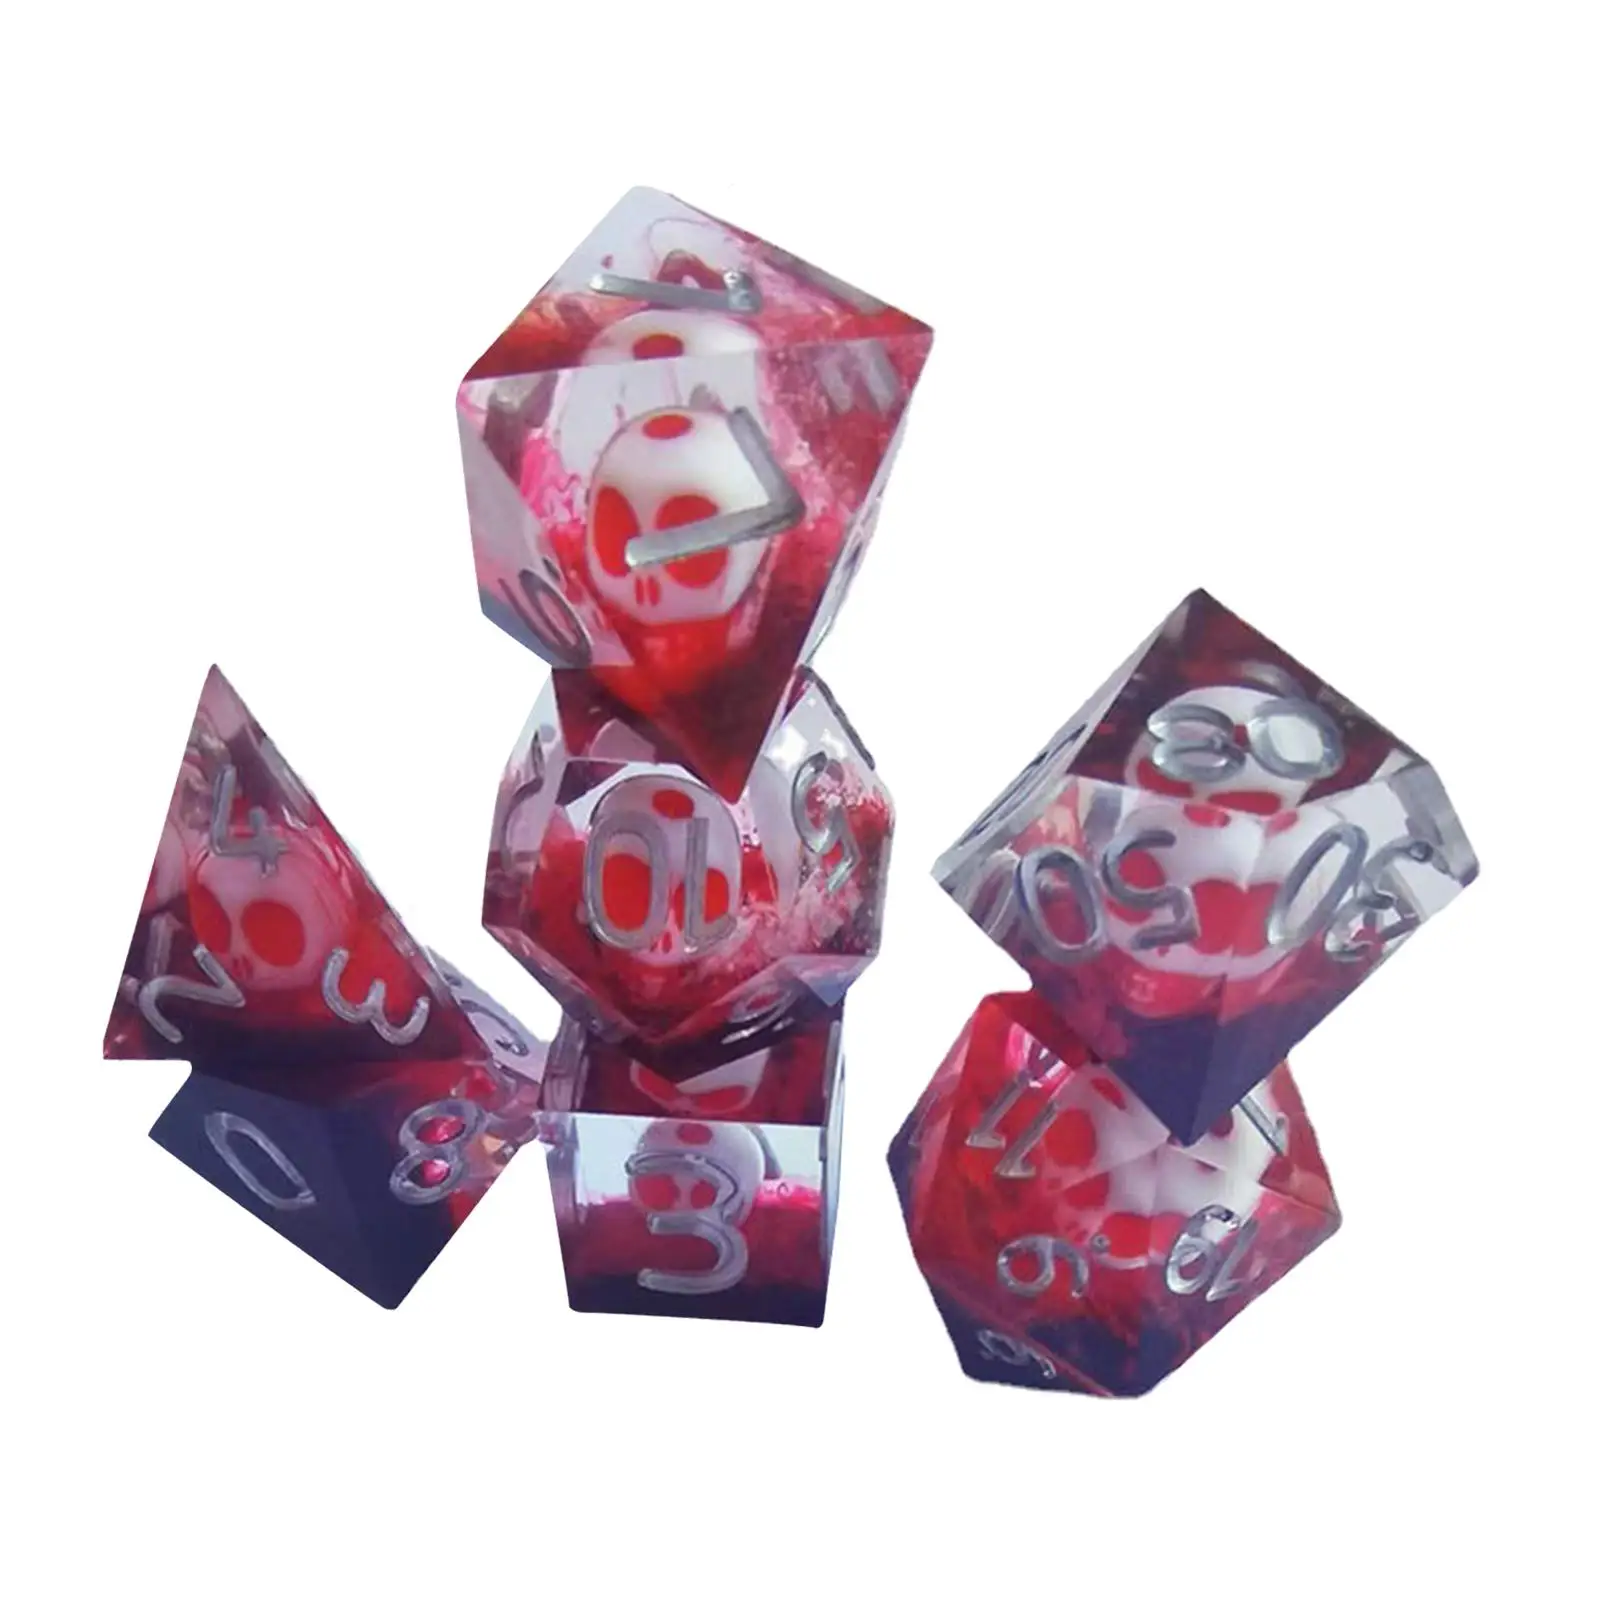 7x Polyhedral Dices Set Multi Sided Props Numeral Dices Toys for Table Game Role Playing Dices Games Party Board Games Leisure